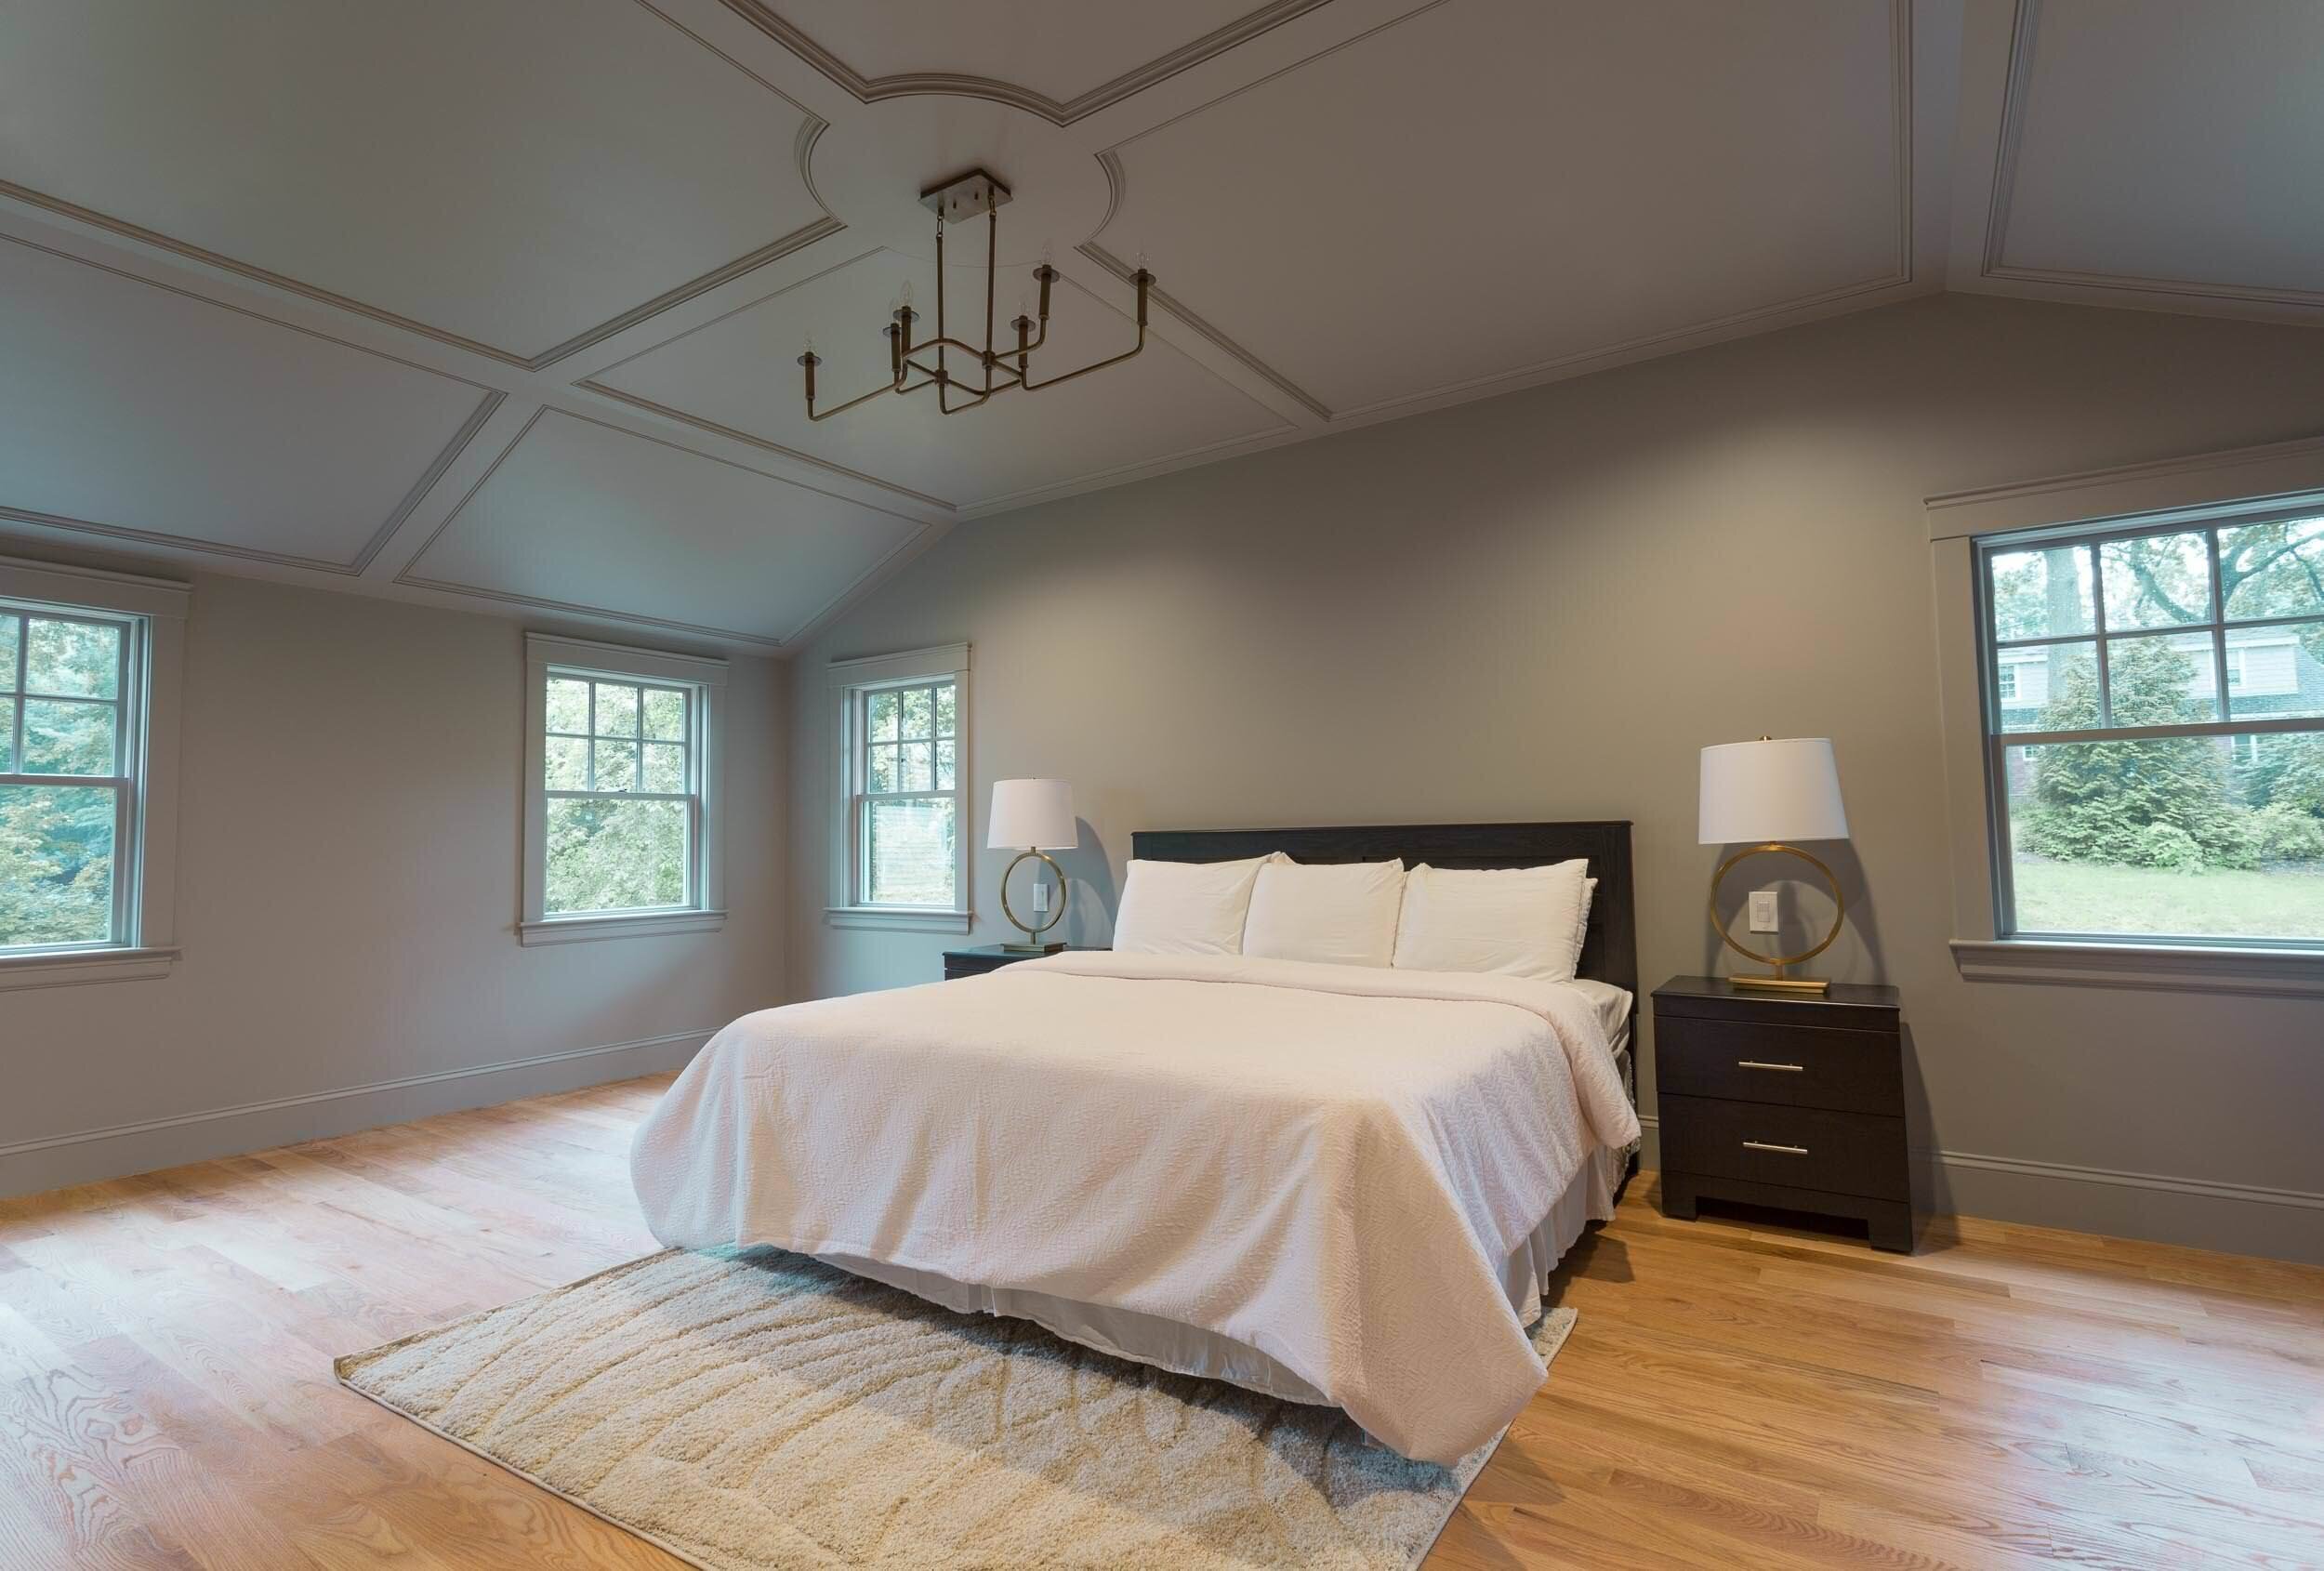 5 Ways To Paint Your Ceiling In 2020, When Painting A Room Should The Ceiling Be White